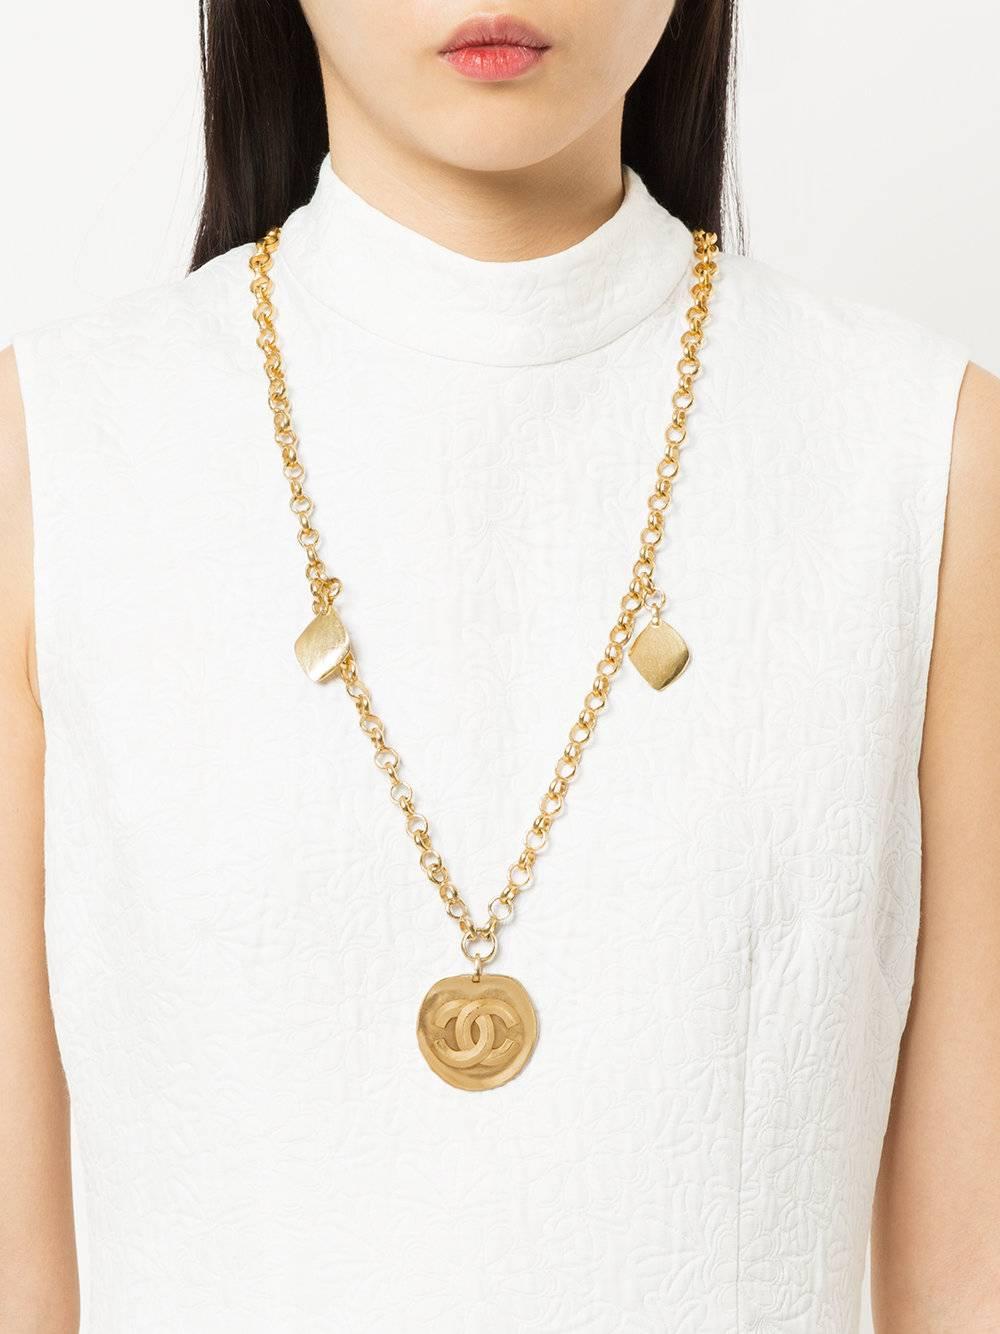 Chanel Gold Charm Chain Link Drape Drop Evening Statement Necklace 

Metal
Gold tone
Hook closure
Made in France
Charm diameter 1.5"
Chain length 31.5"